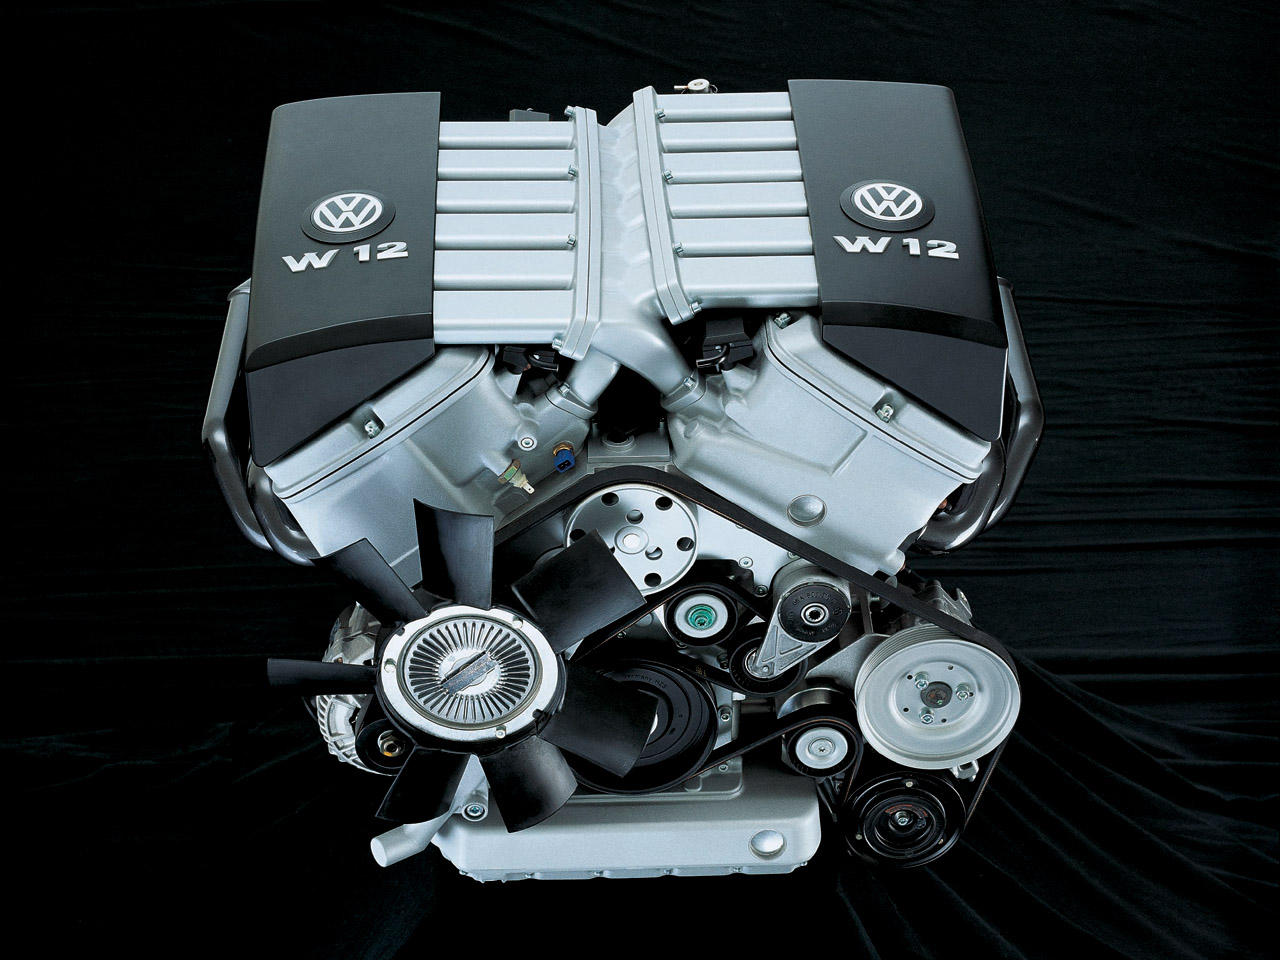 VW W12 Engine at International Engine of the Year – Volkswagen Group is the big winner